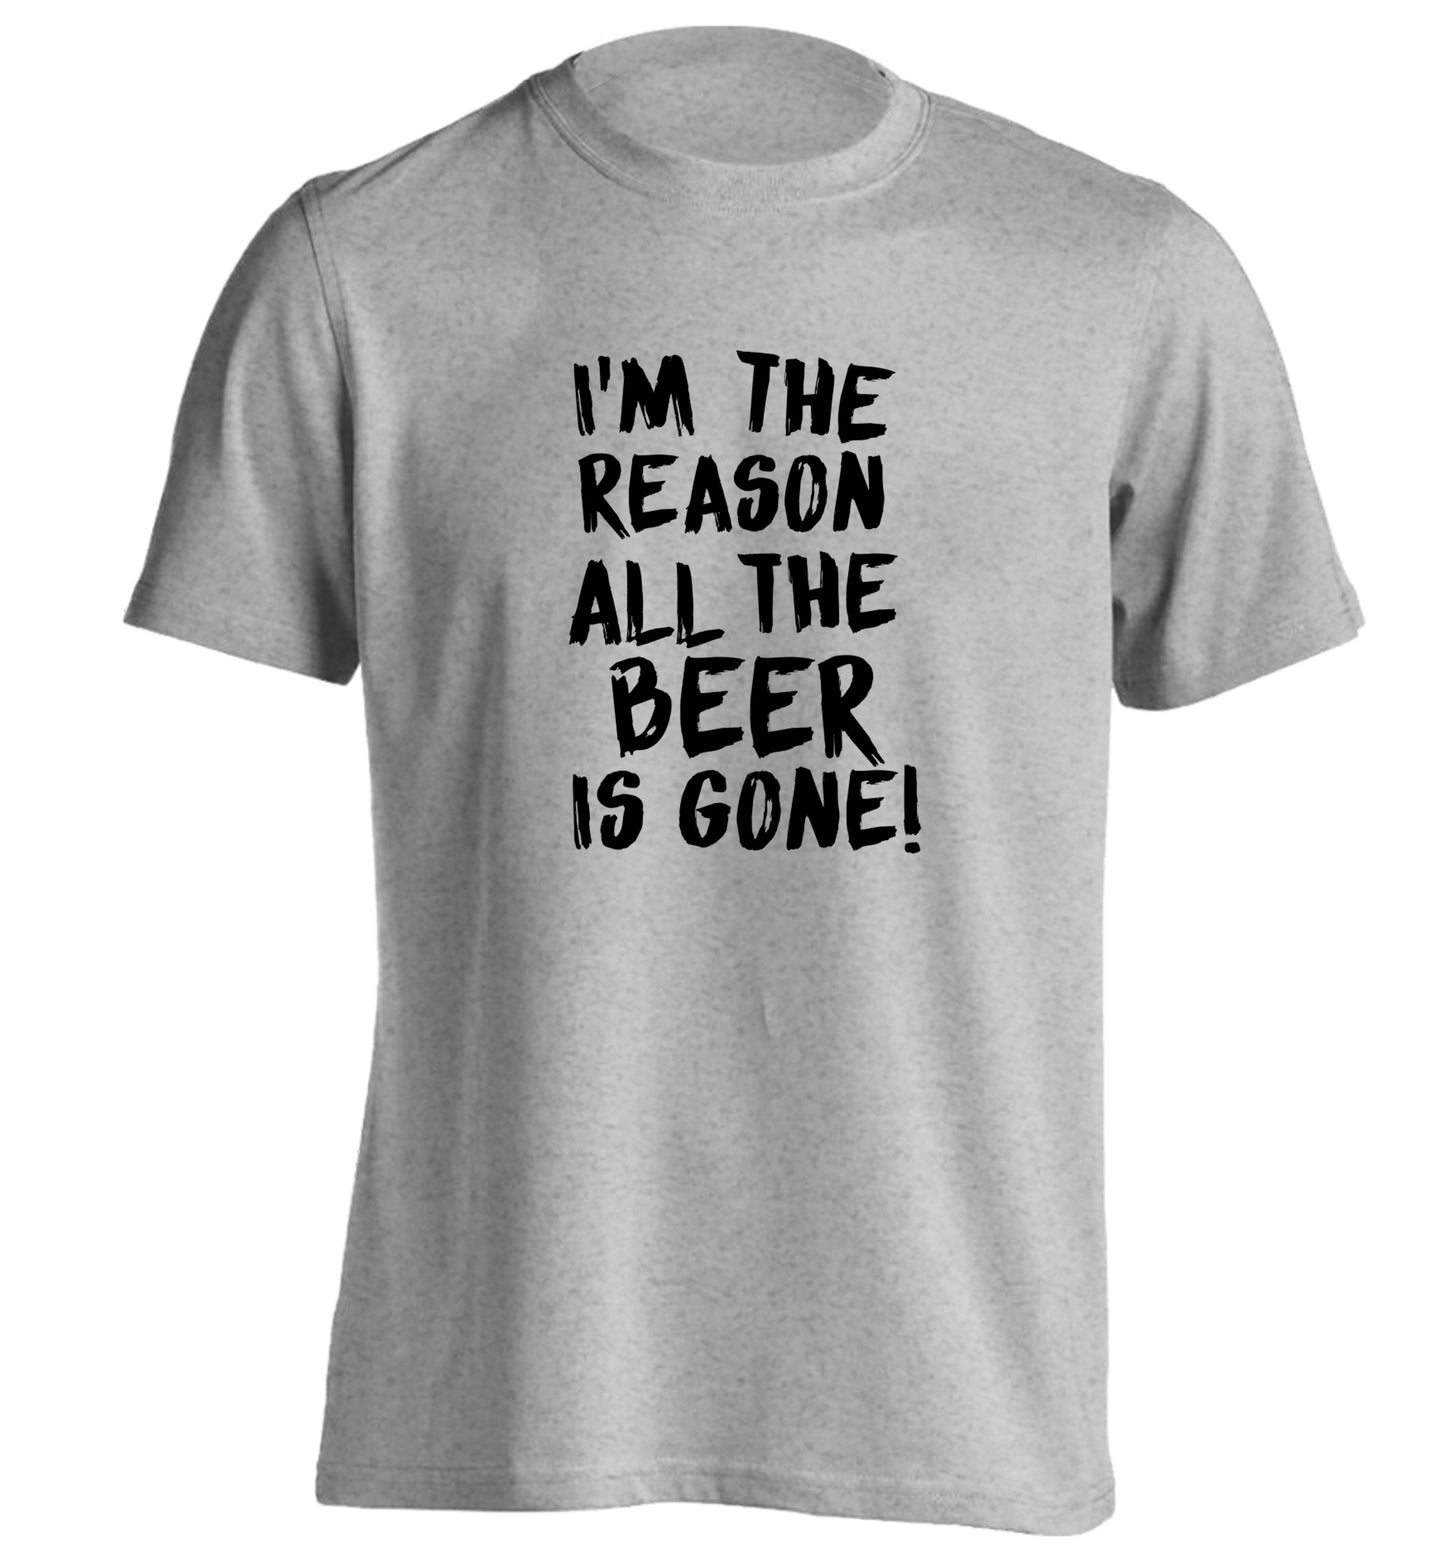 I'm the reason all the beer is gone adults unisex grey Tshirt 2XL